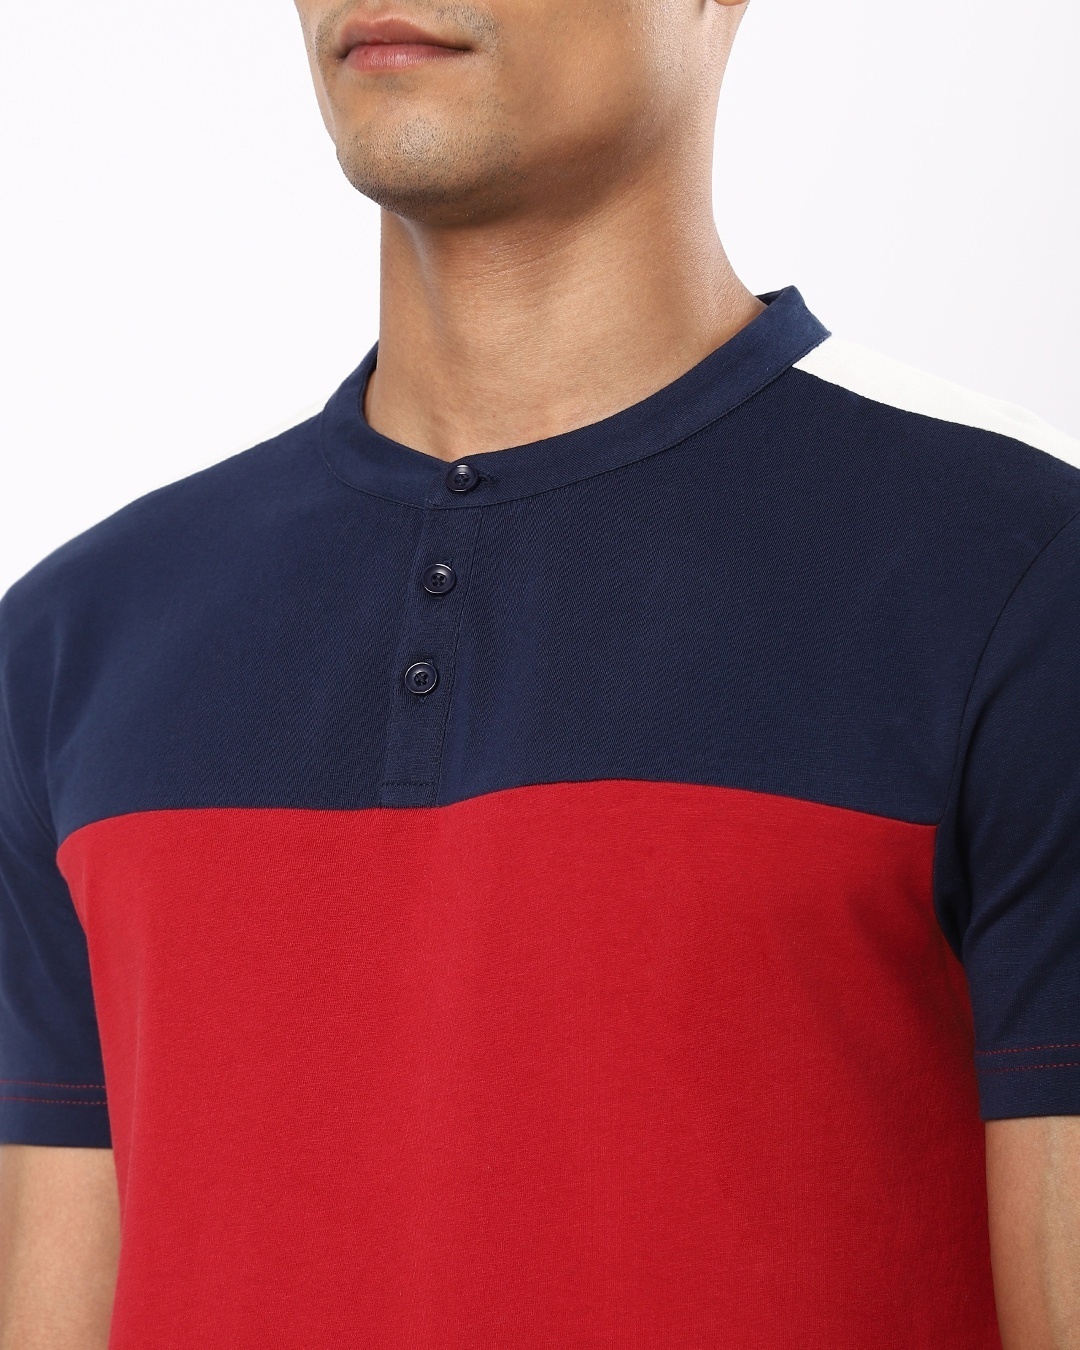 Shop Men's Red and Blue Color Block Henley T-shirt